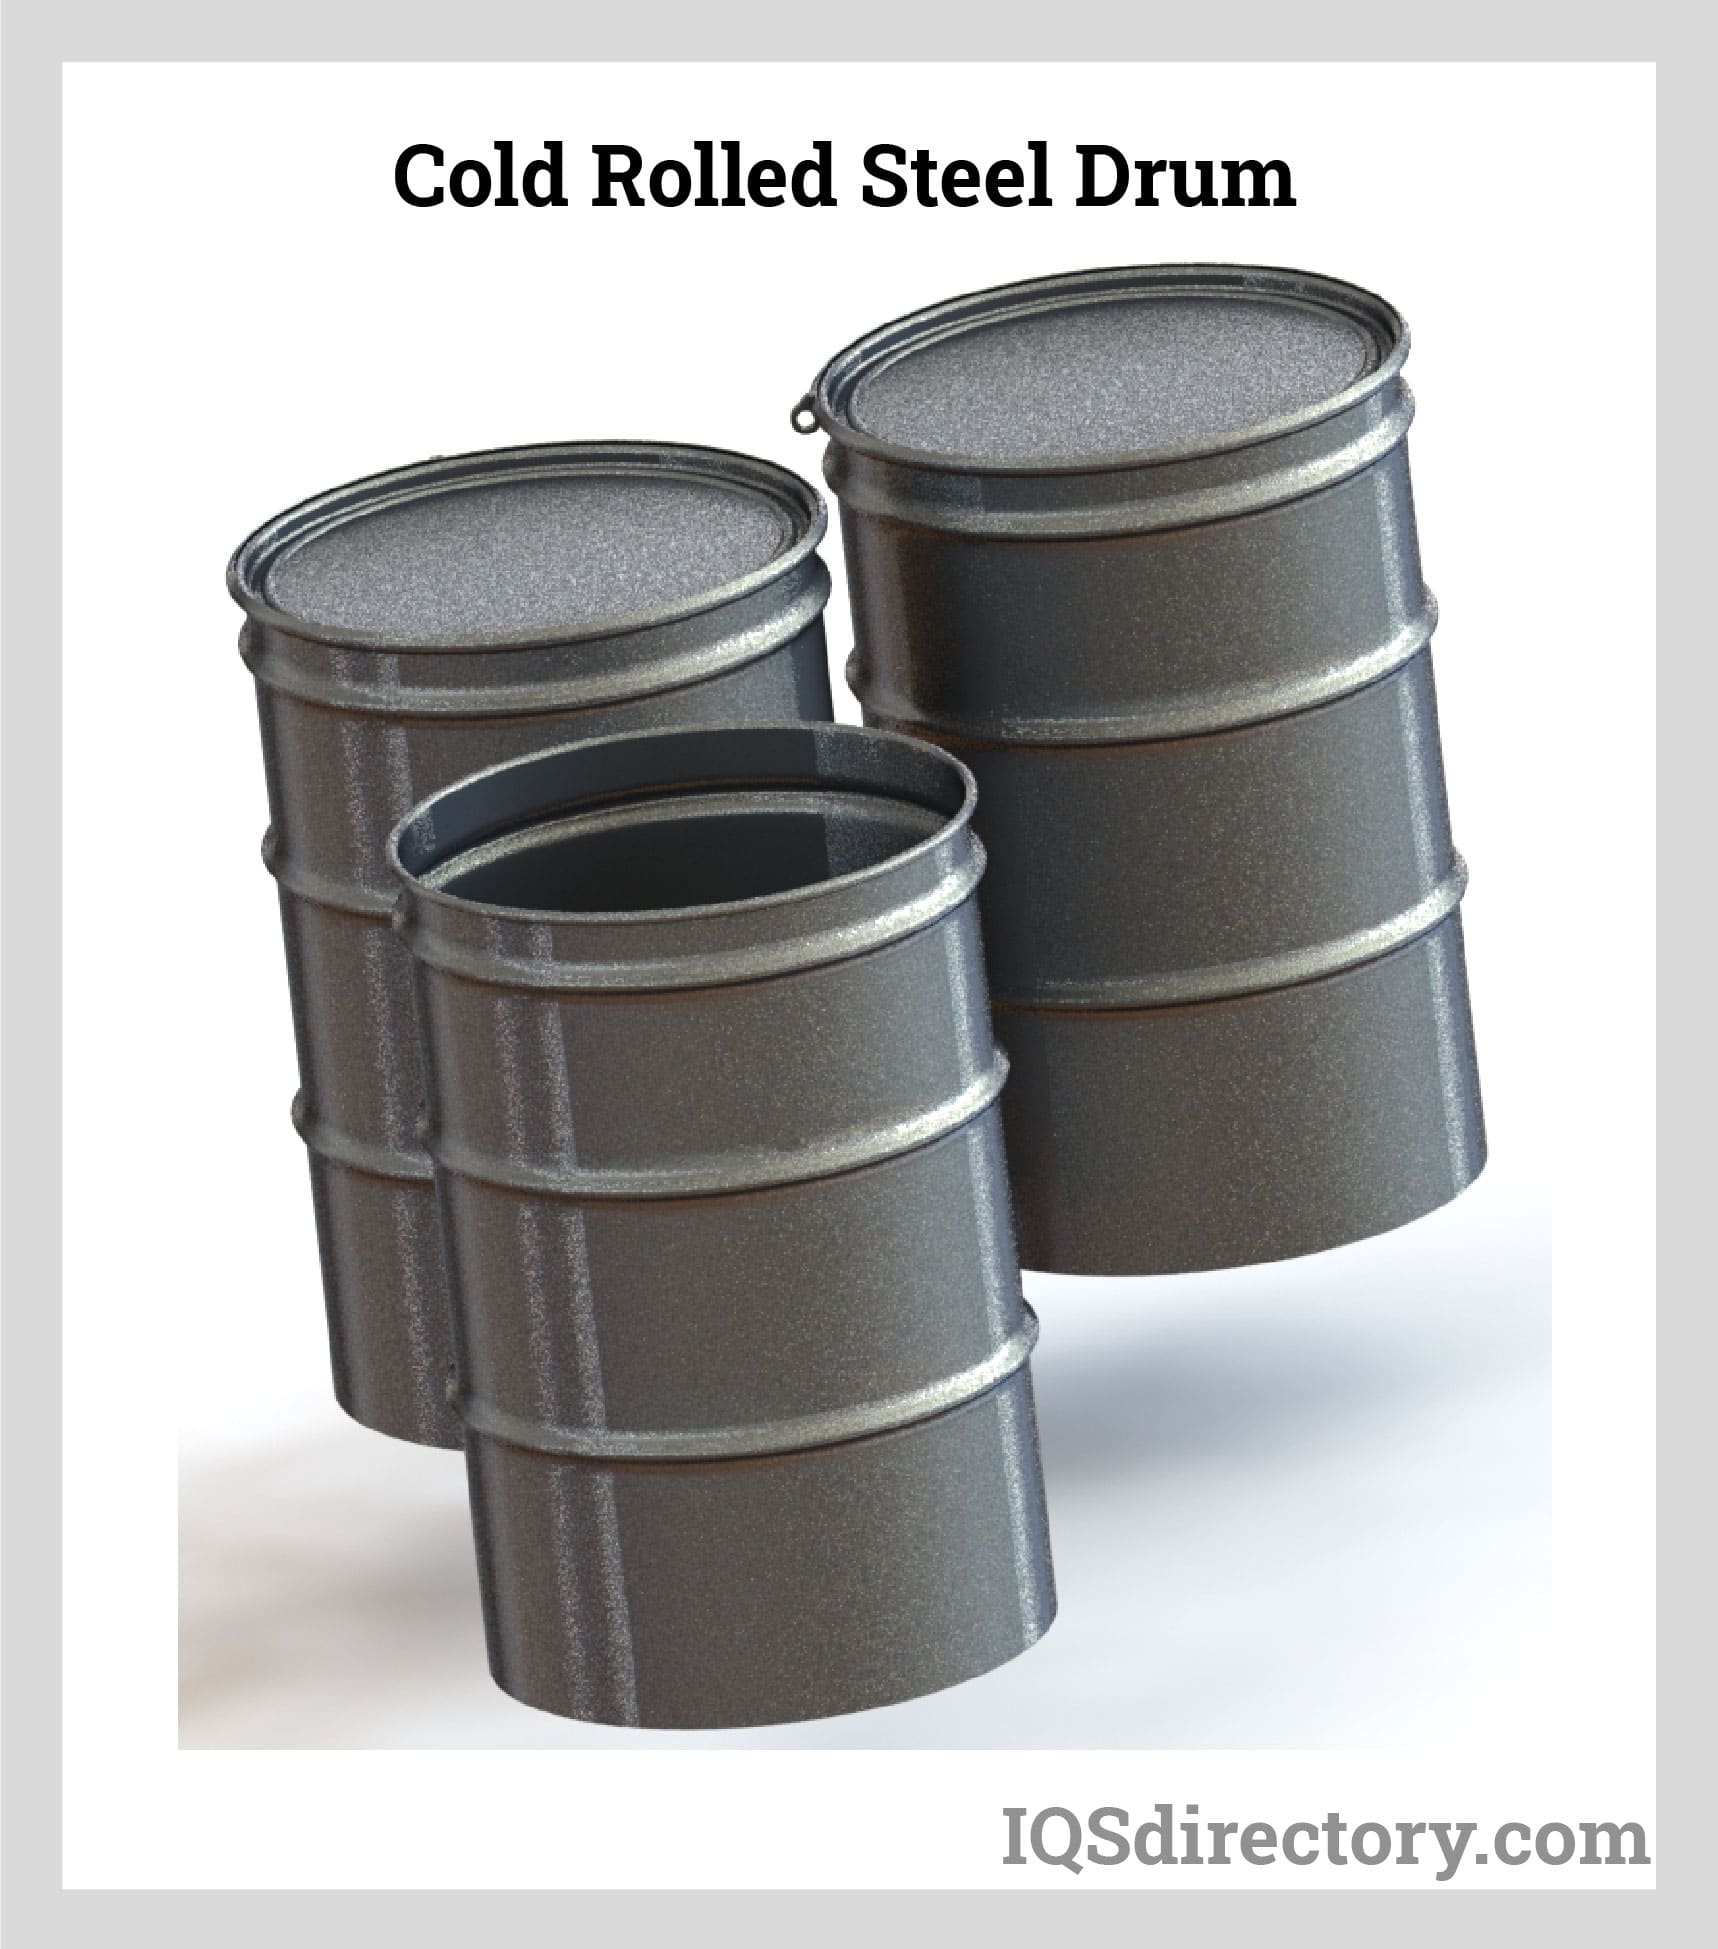 Cold Rolled Steel Drum